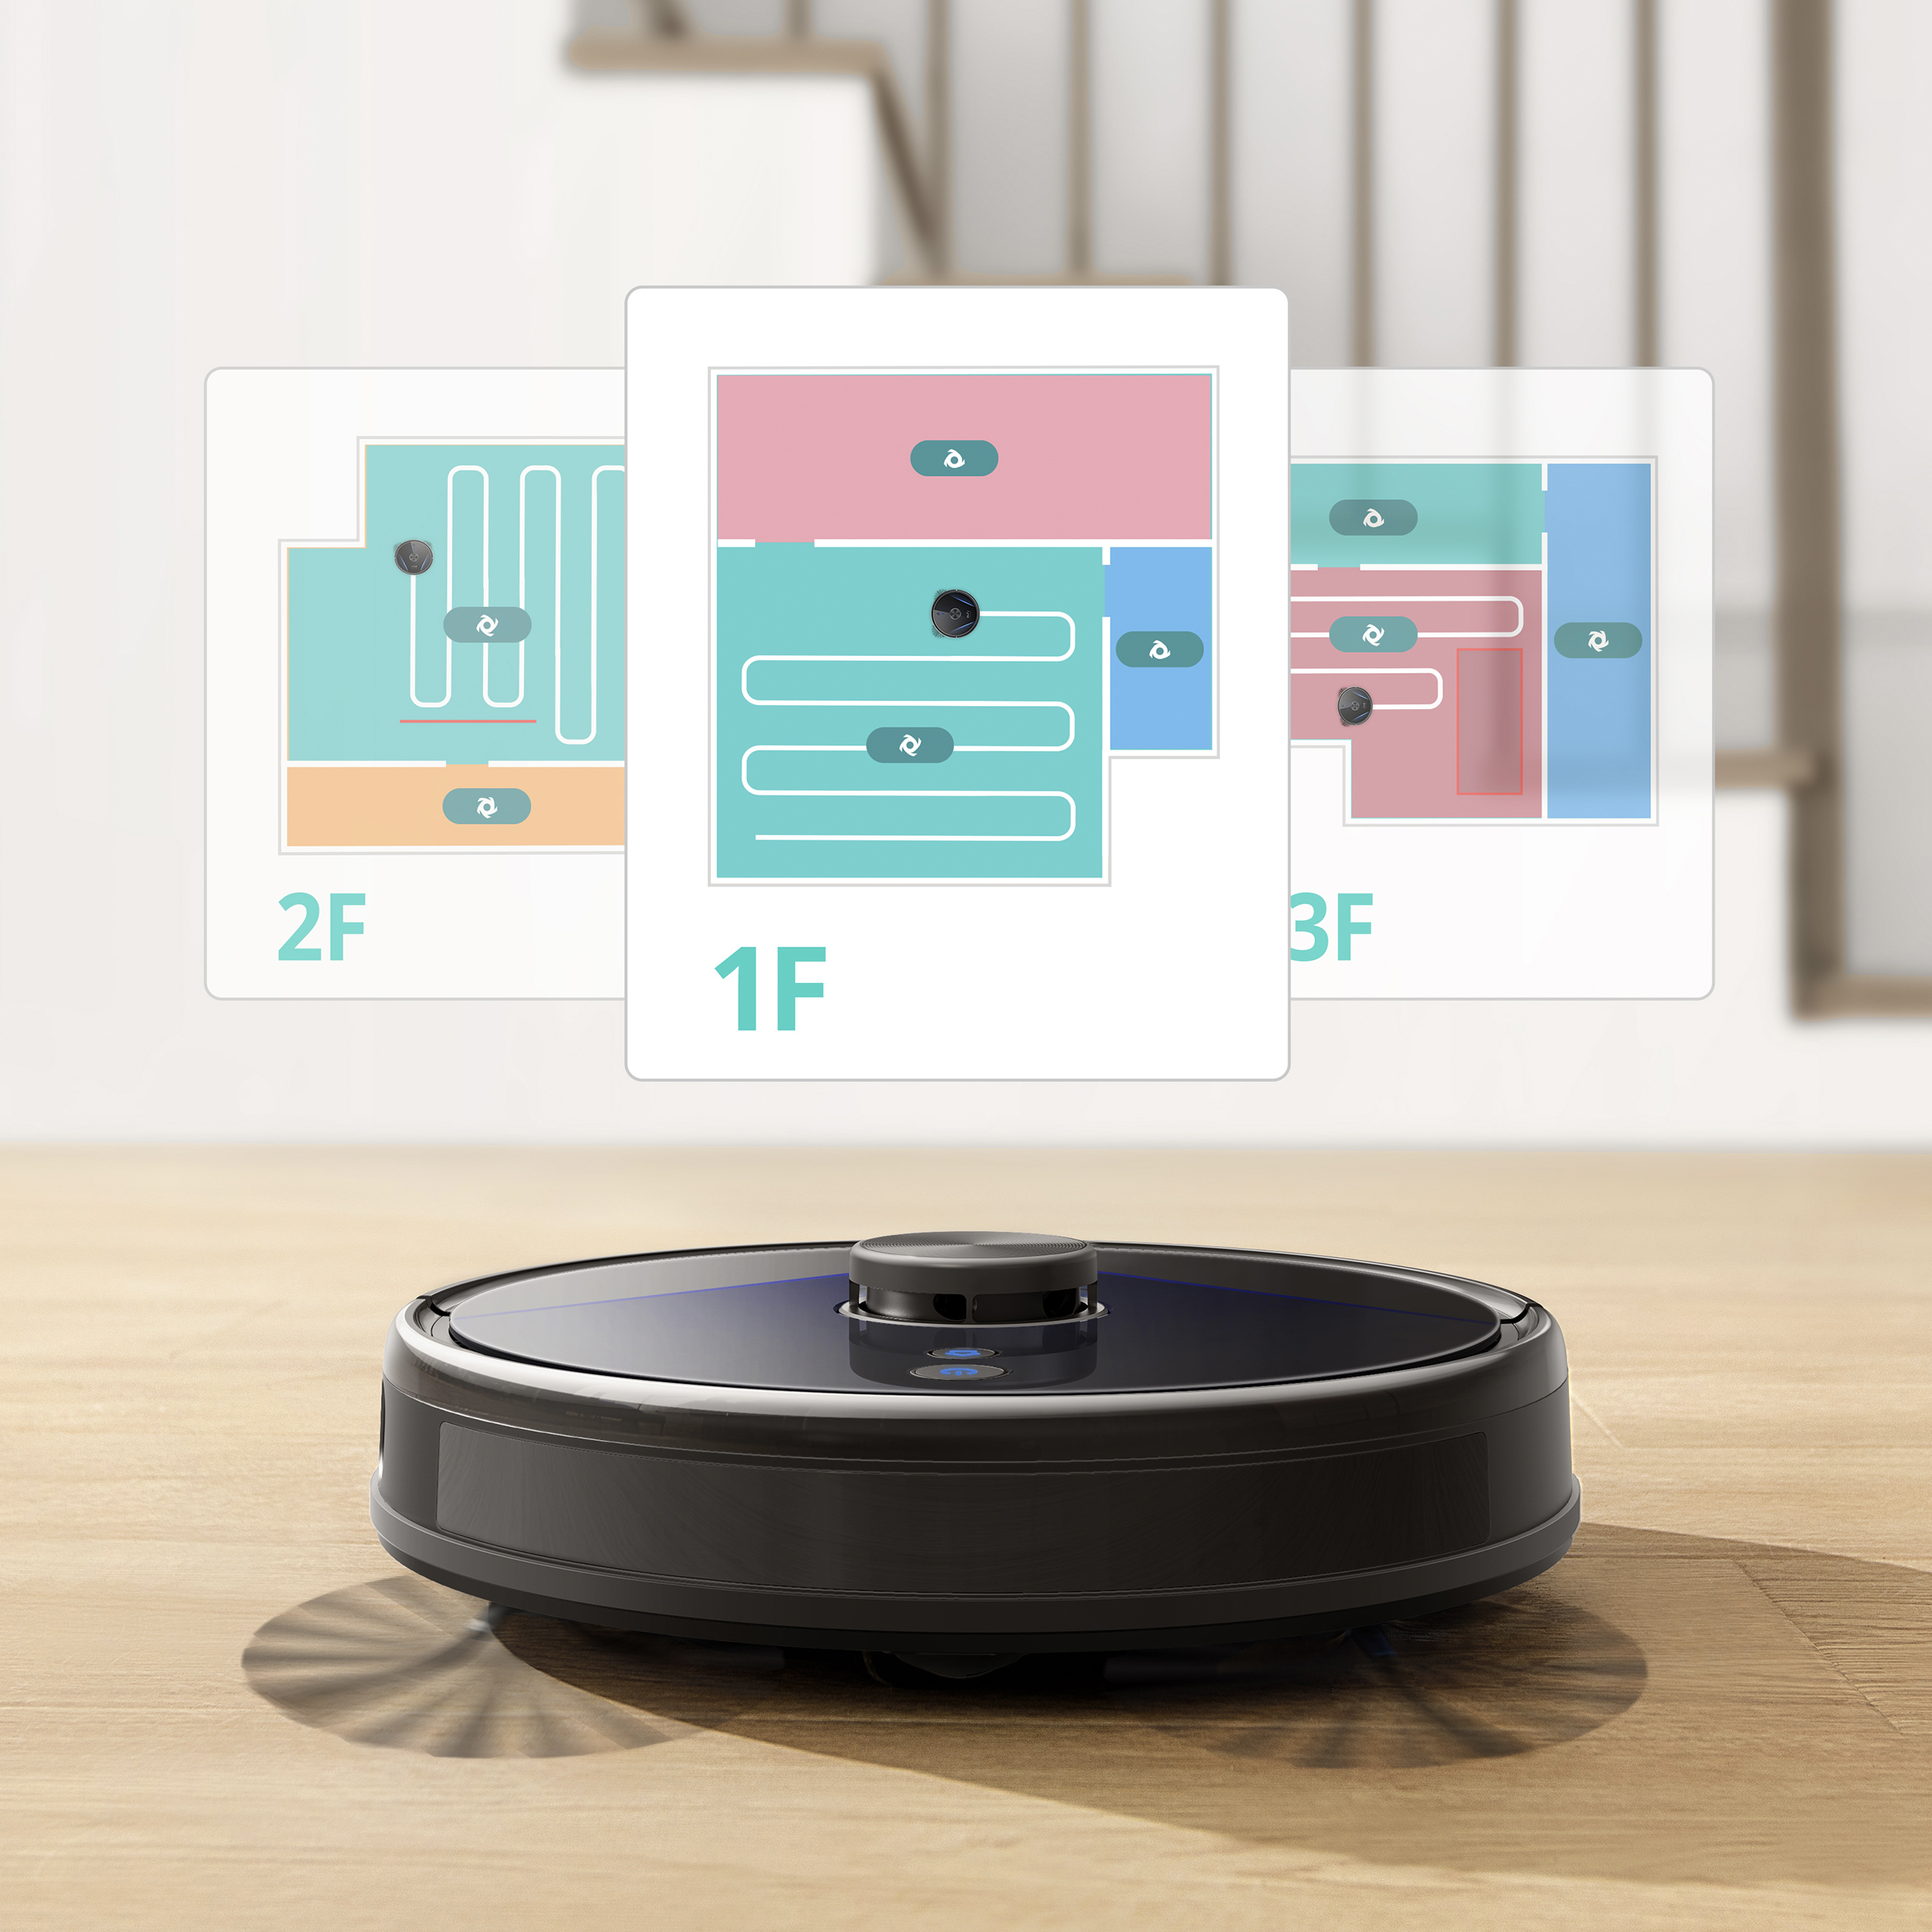 eufy LR20 Robot Vacuum, Laser Navigation for Precise Cleaning, 3000Pa Suction, T2192J11, New - image 3 of 17